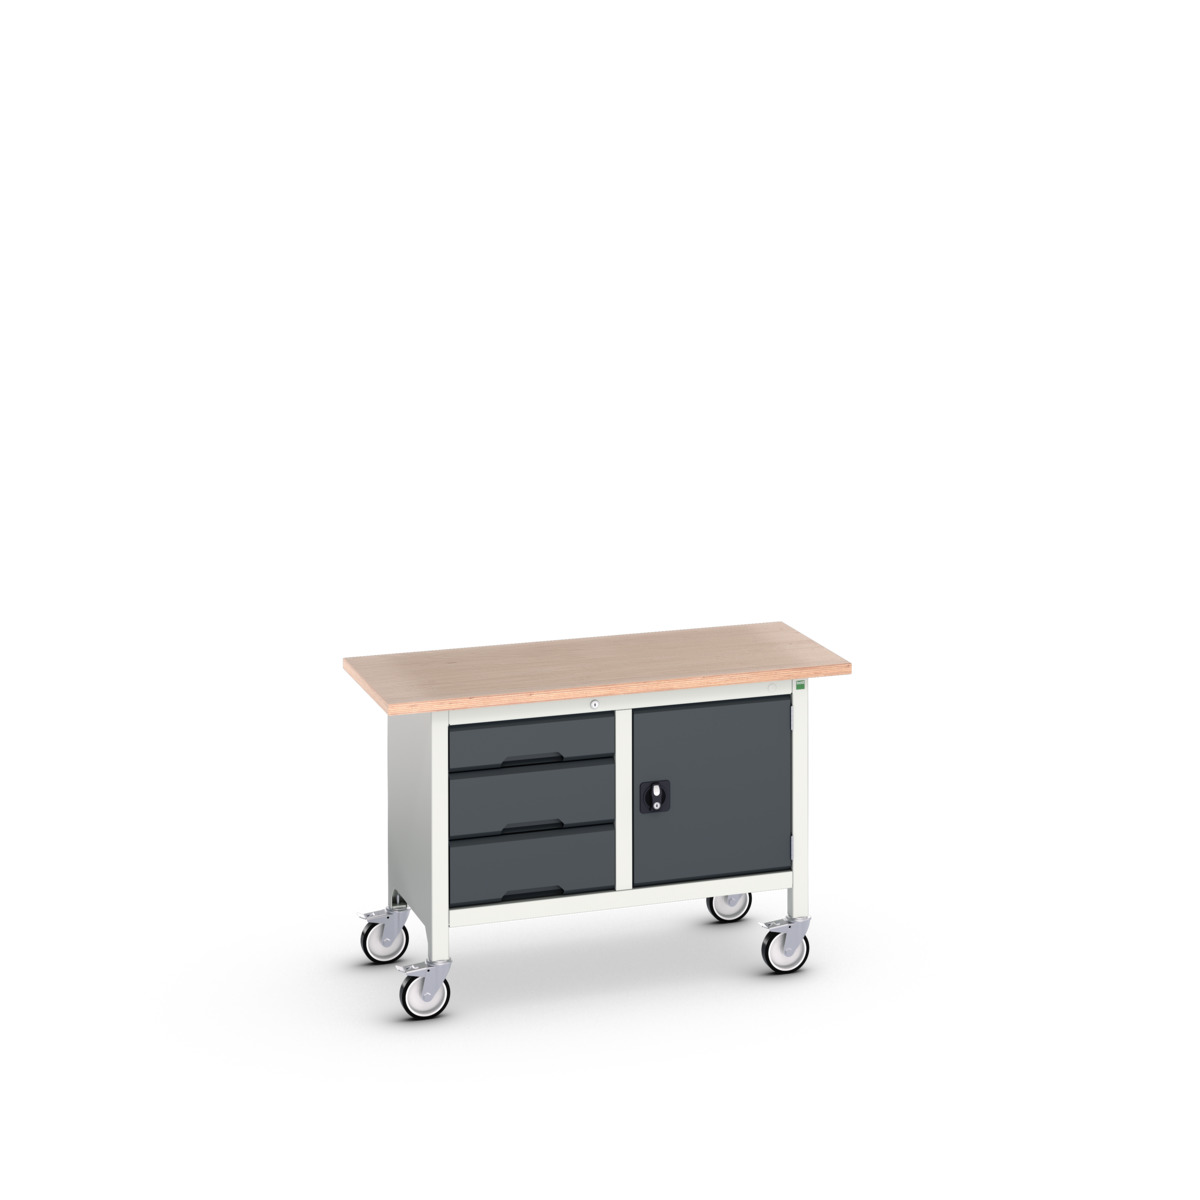 16923203.19 - verso mobile storage bench (mpx)